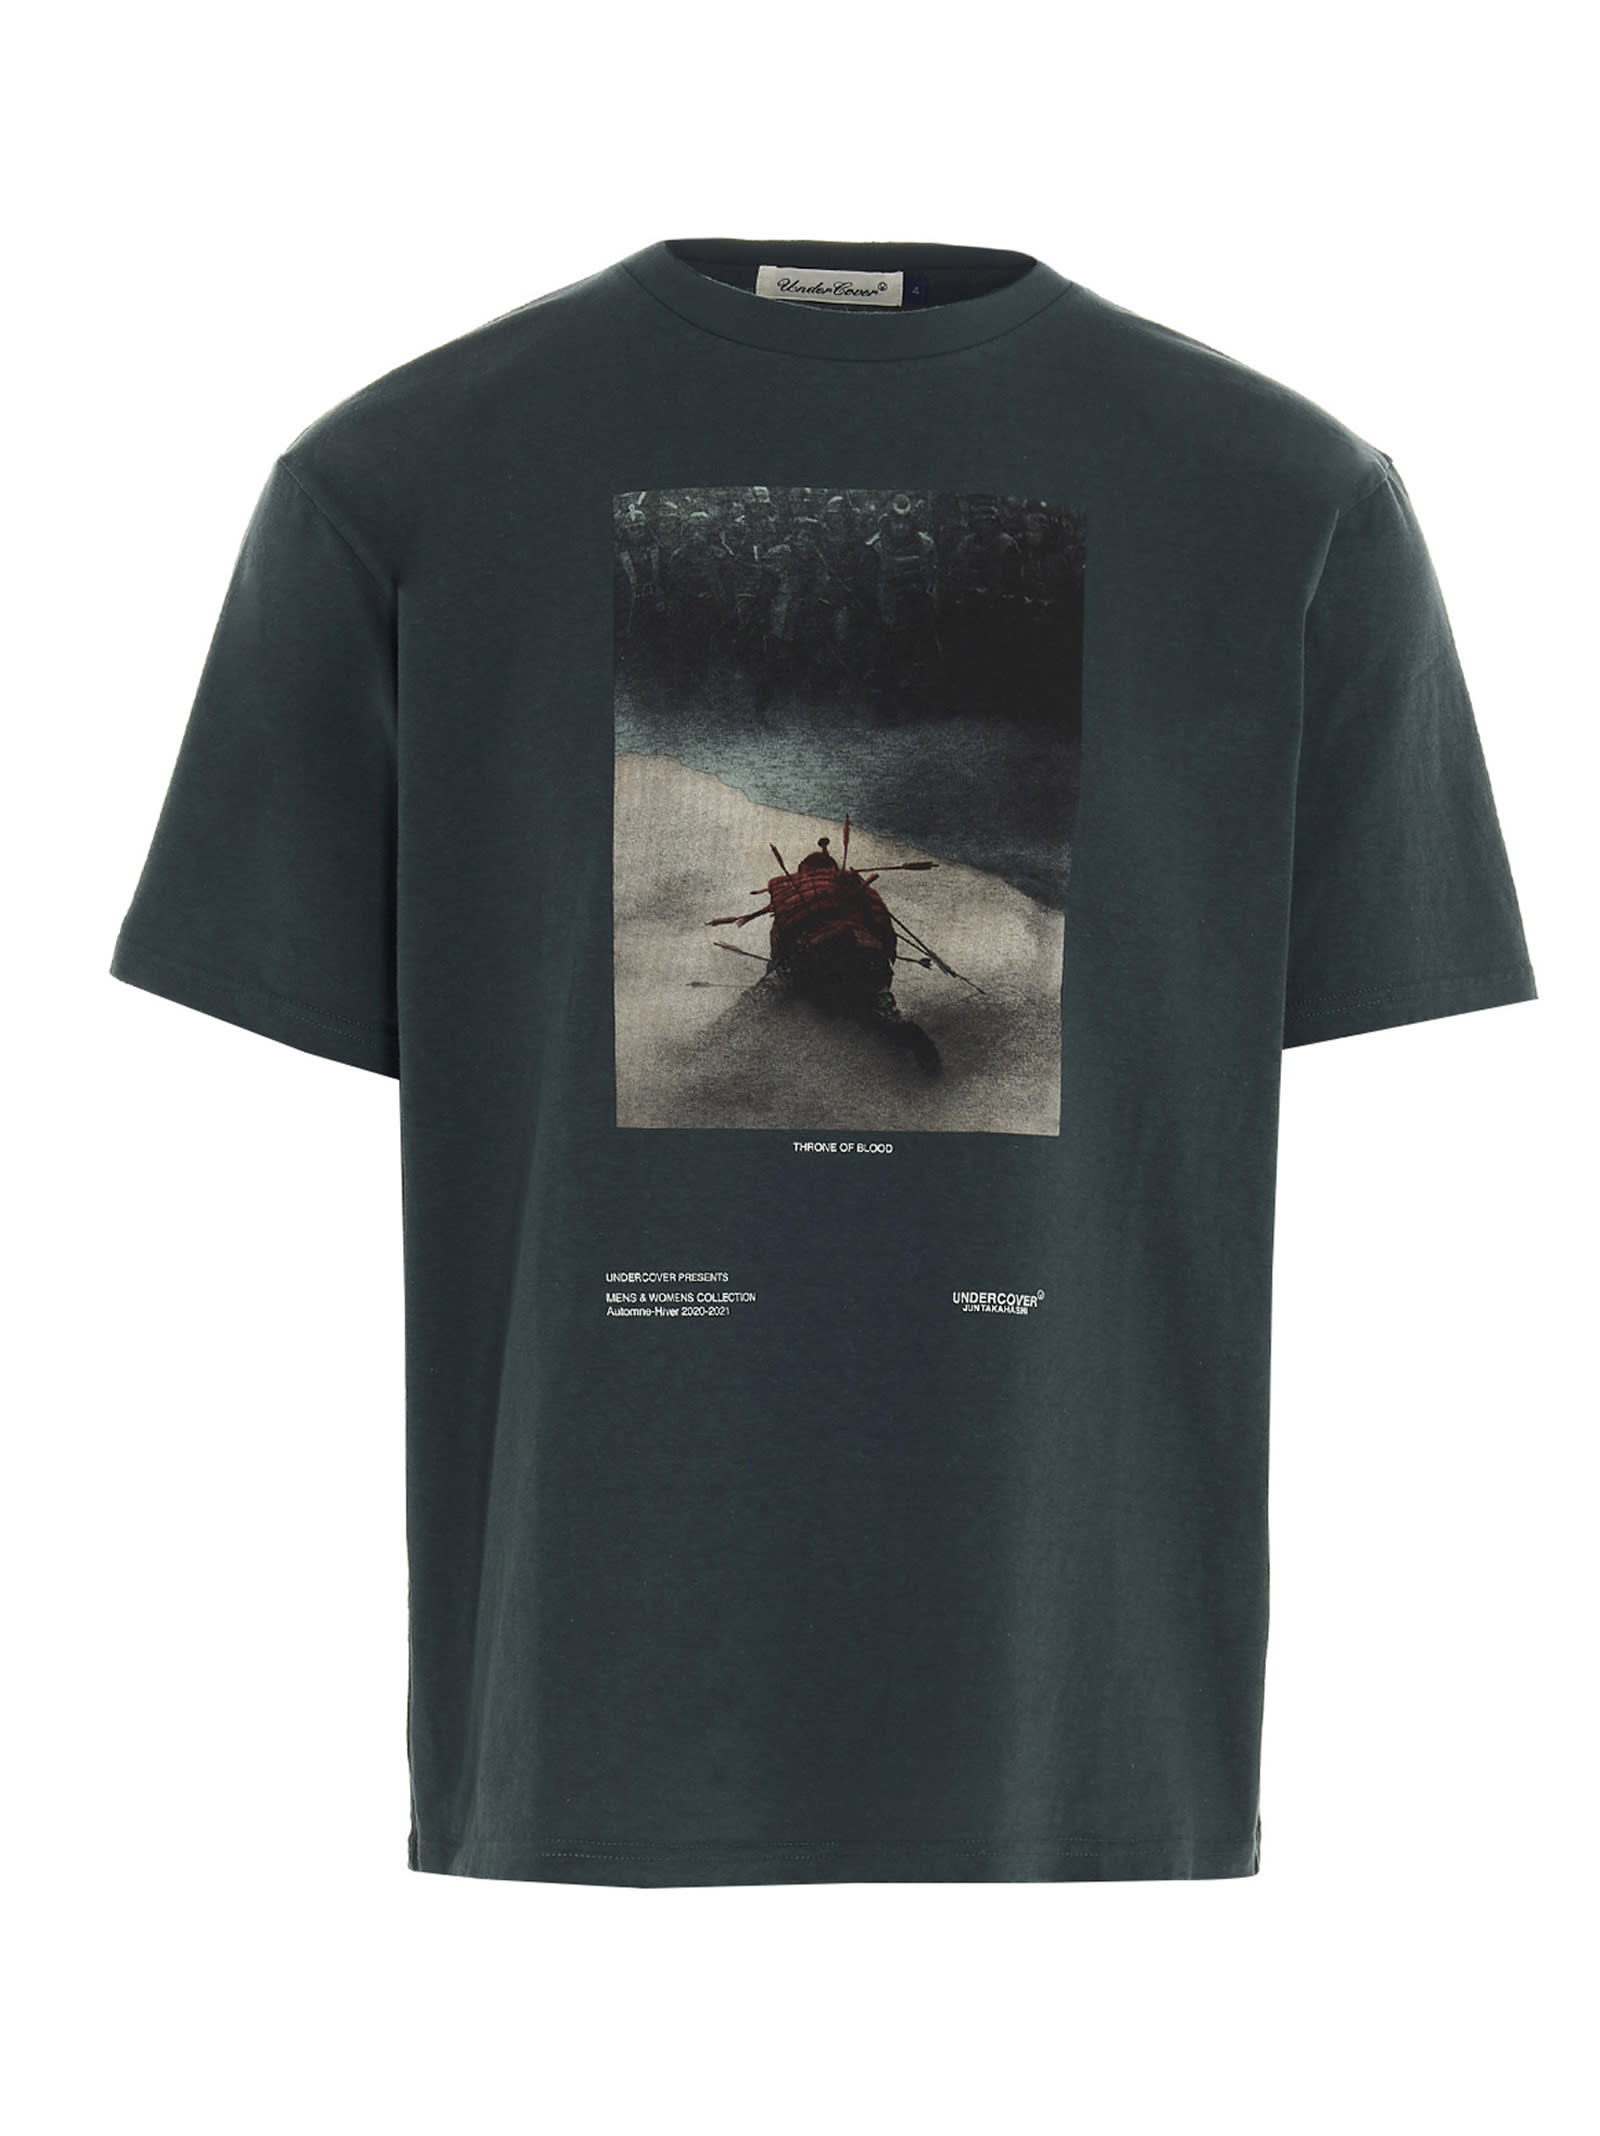 UNDERCOVER THRONE OF BLOOD T-SHIRT